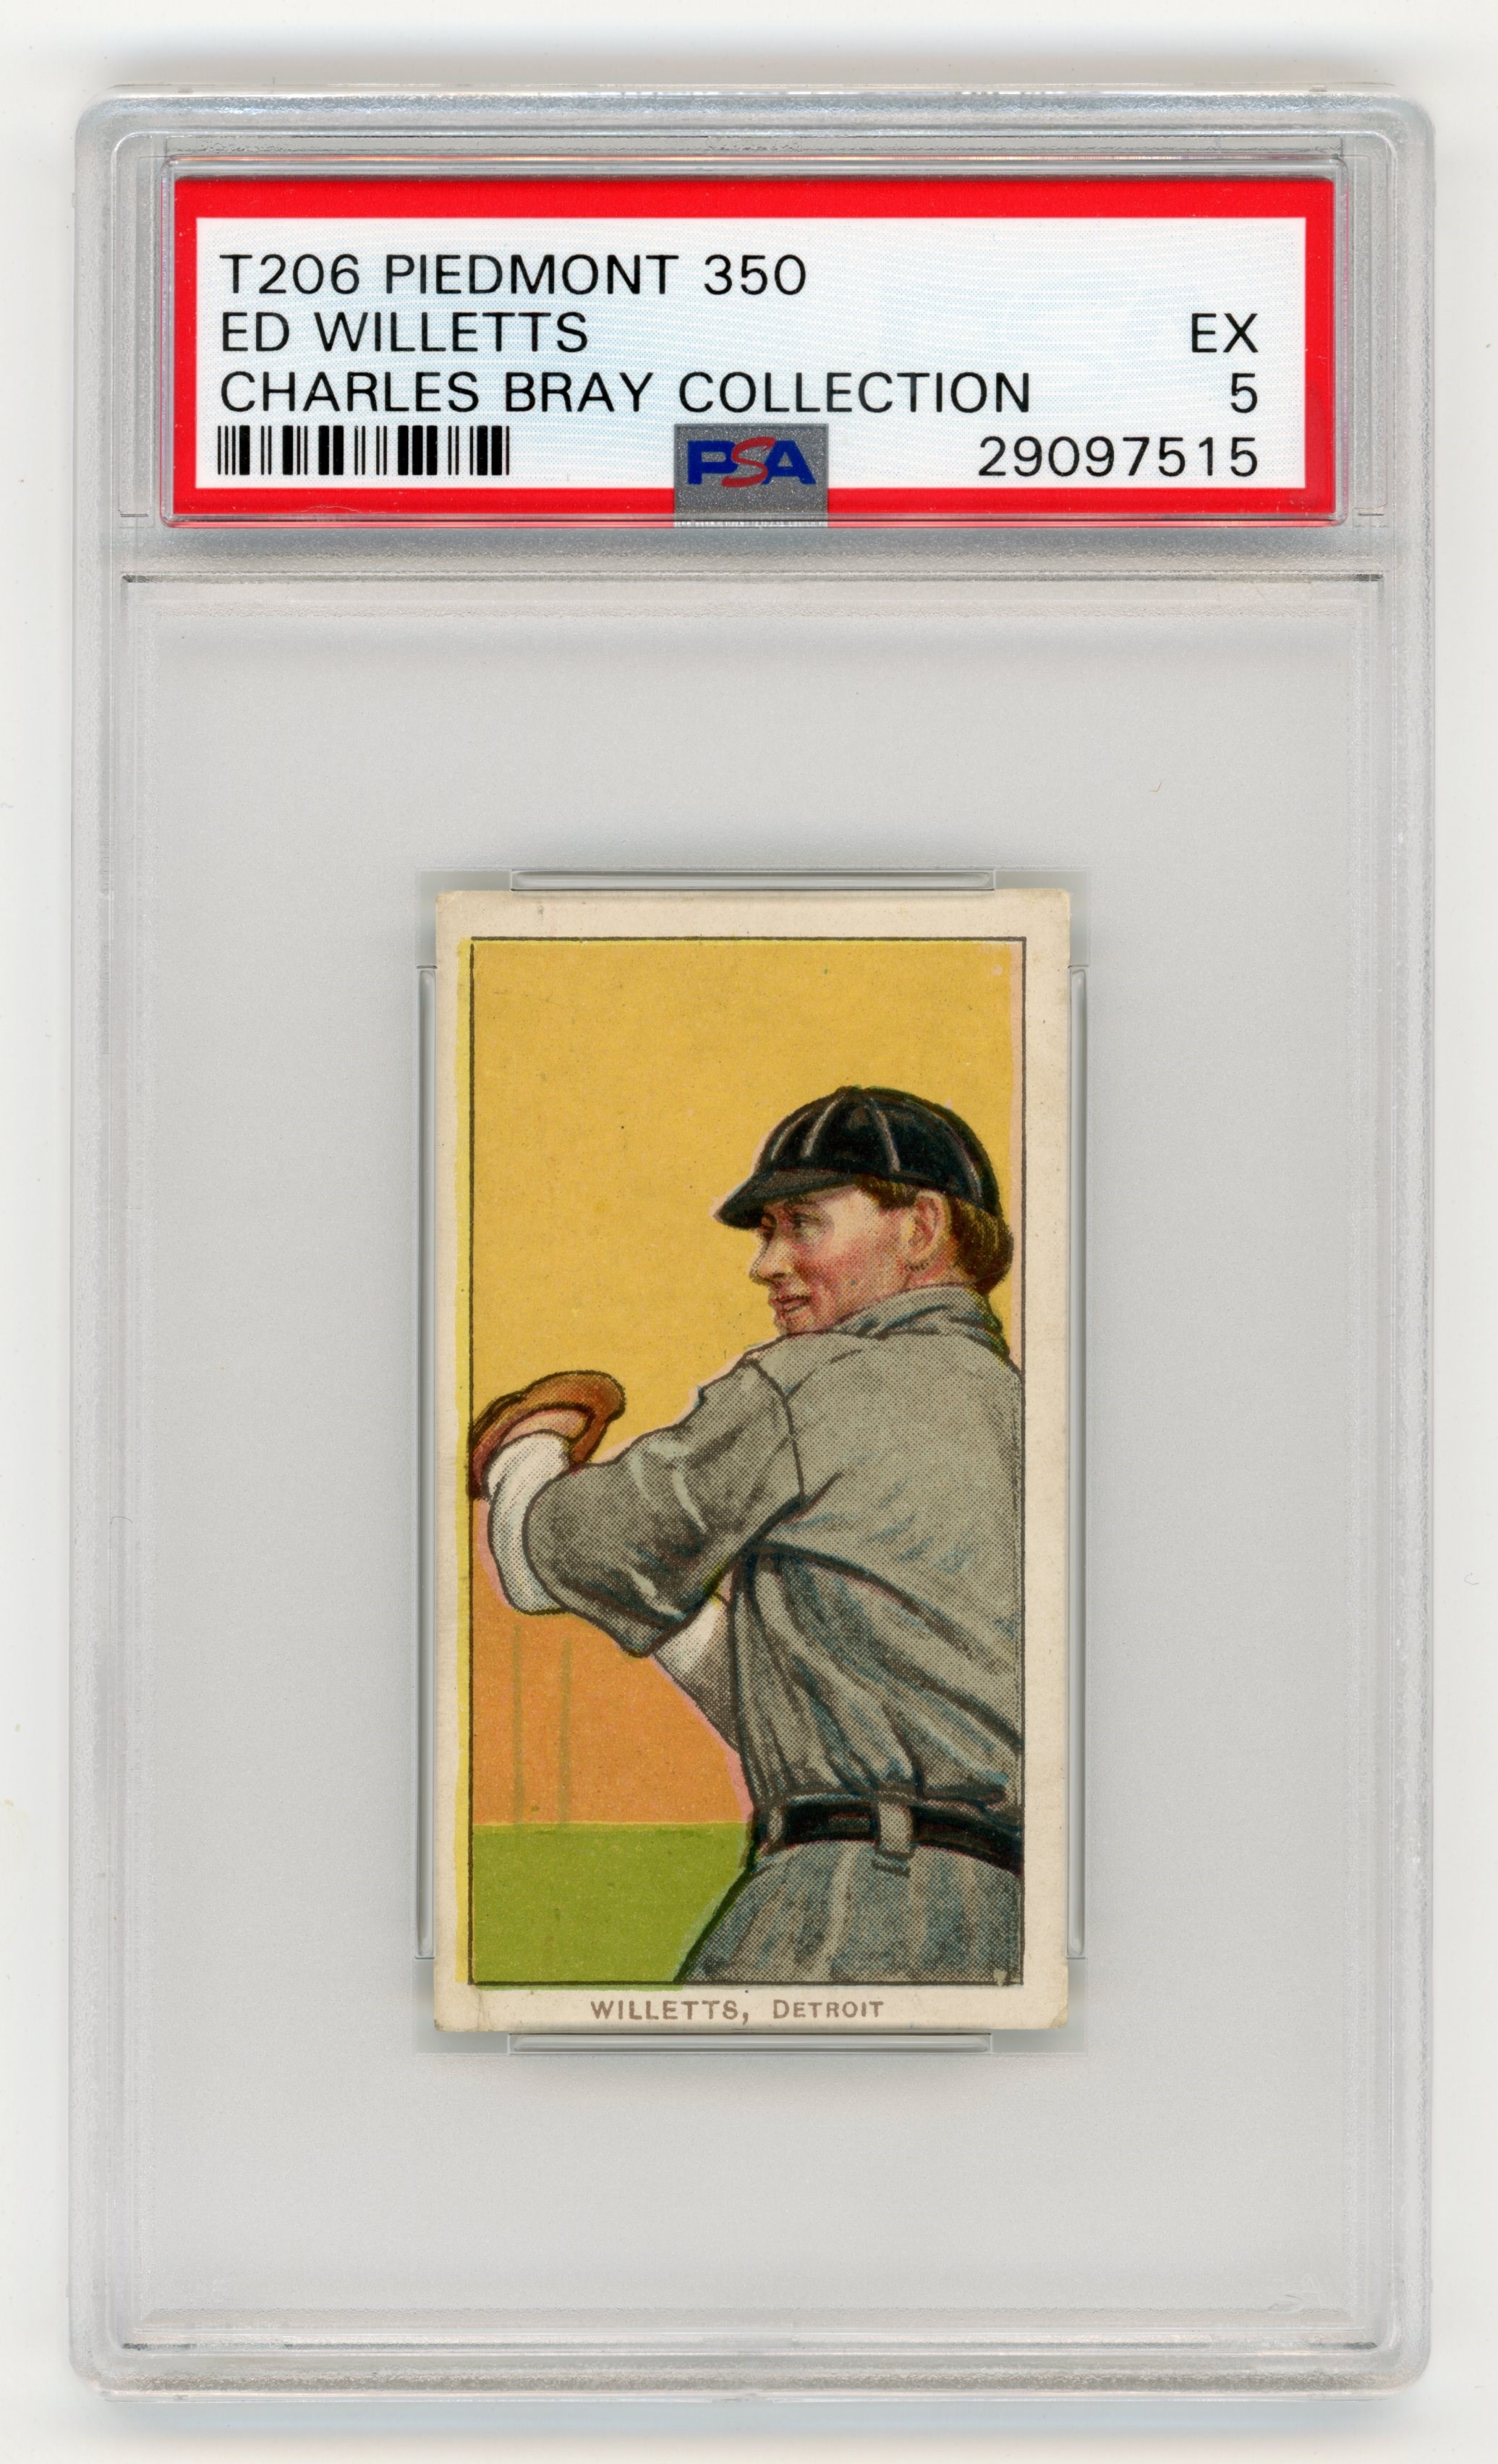 T206 Piedmont 350 Ed Willetts PSA 5 From Charles Bray Collection